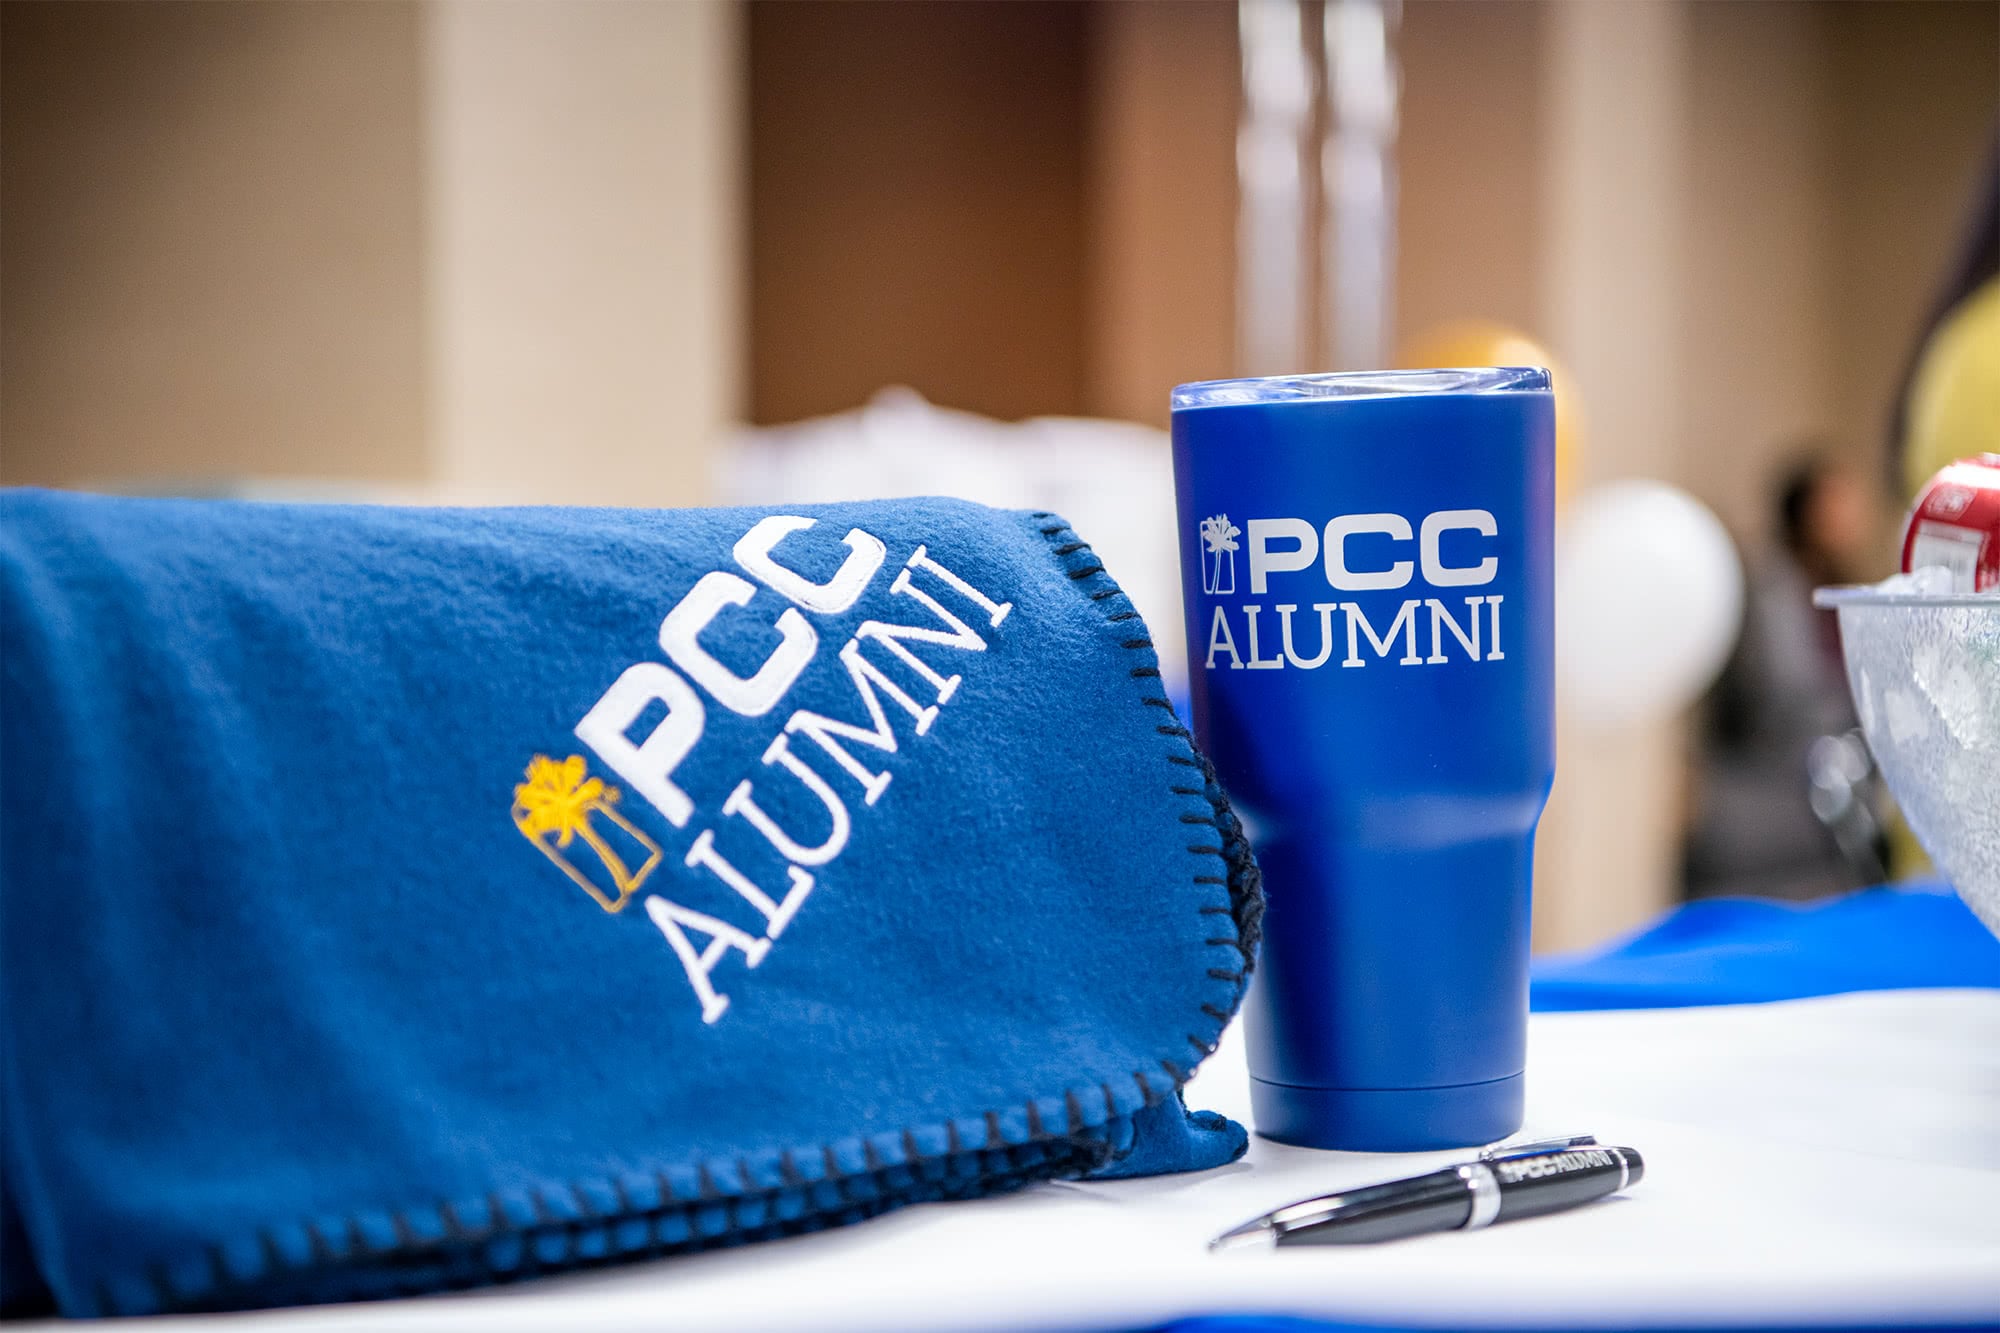 PCC Alumni branded blanket and thermos. 